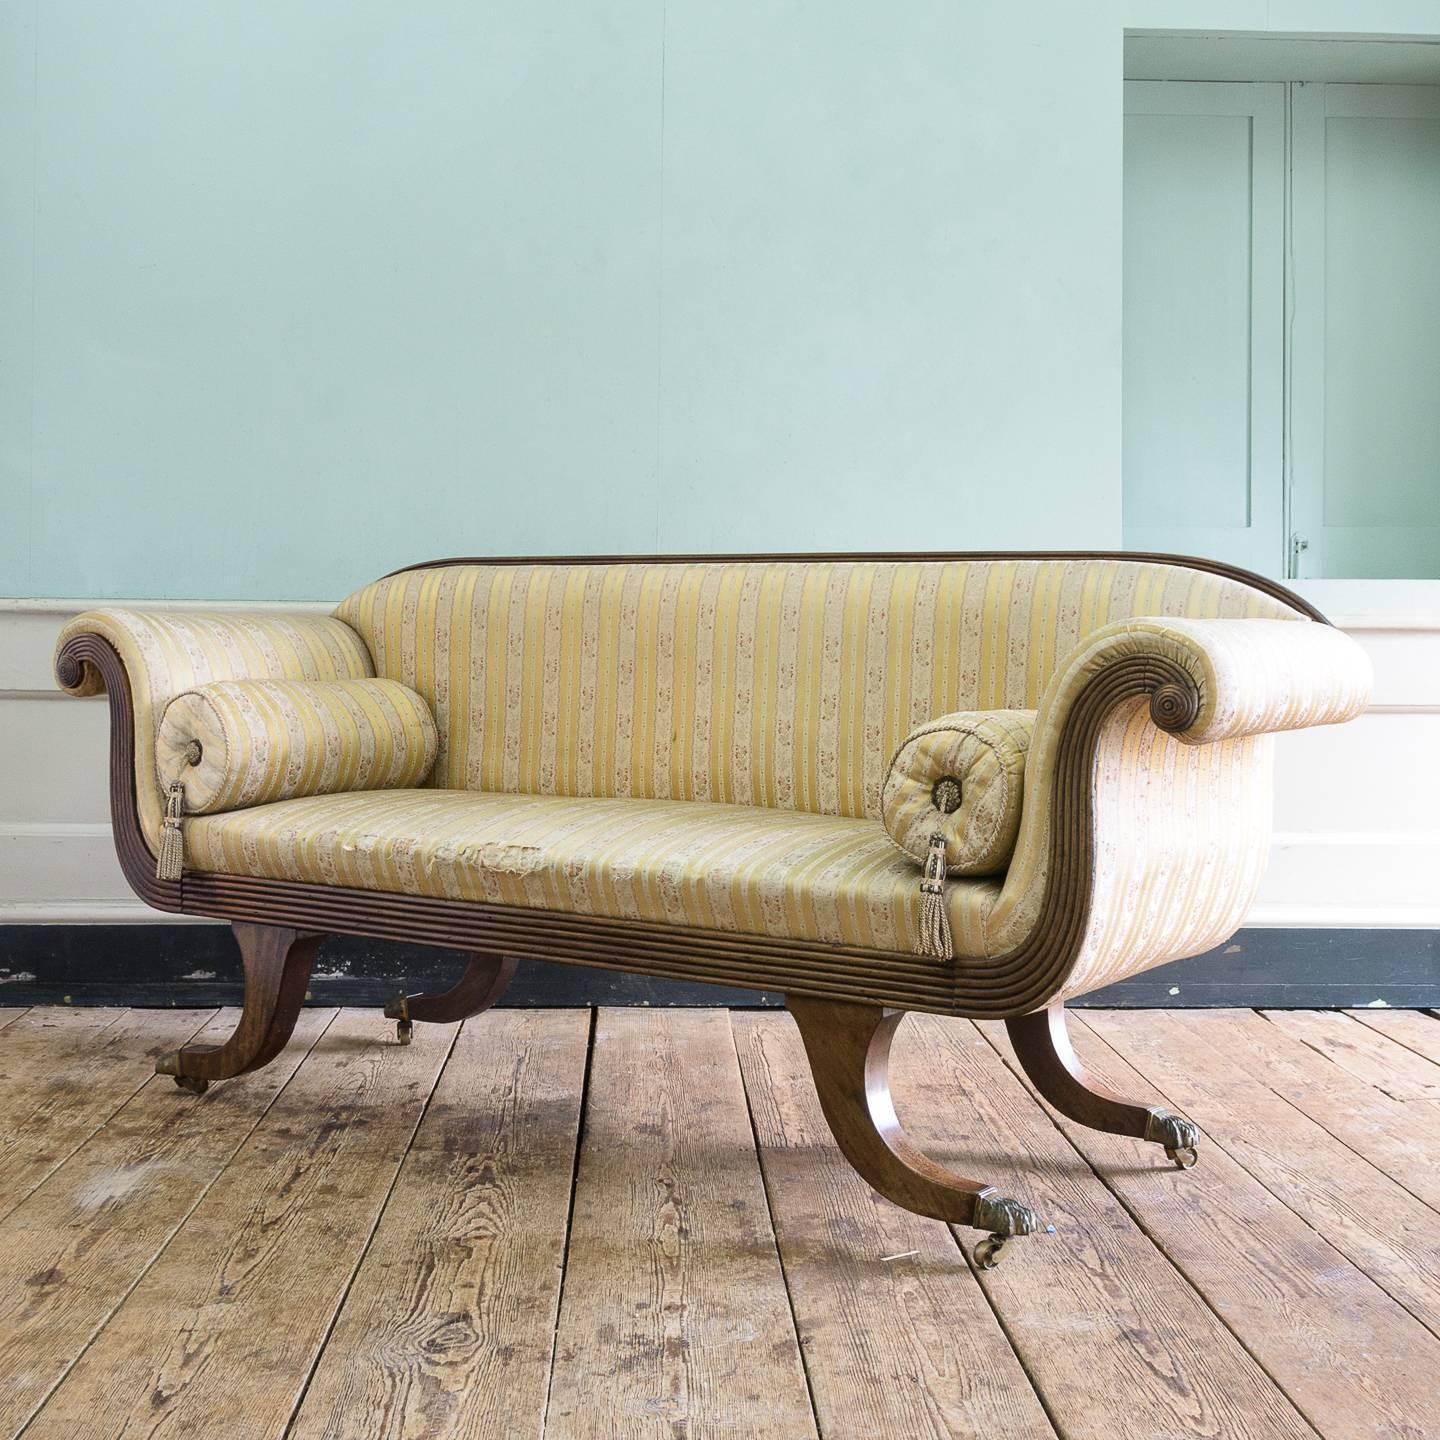 A Regency mahogany scroll end sofa, c.1820, with reeded frame throughout and gold striped silk fabric and bolster cushions, the sabre legs with gilt-brass lion's paw casters. 

A well drawn and incredibly simple sofa, typifying the style and